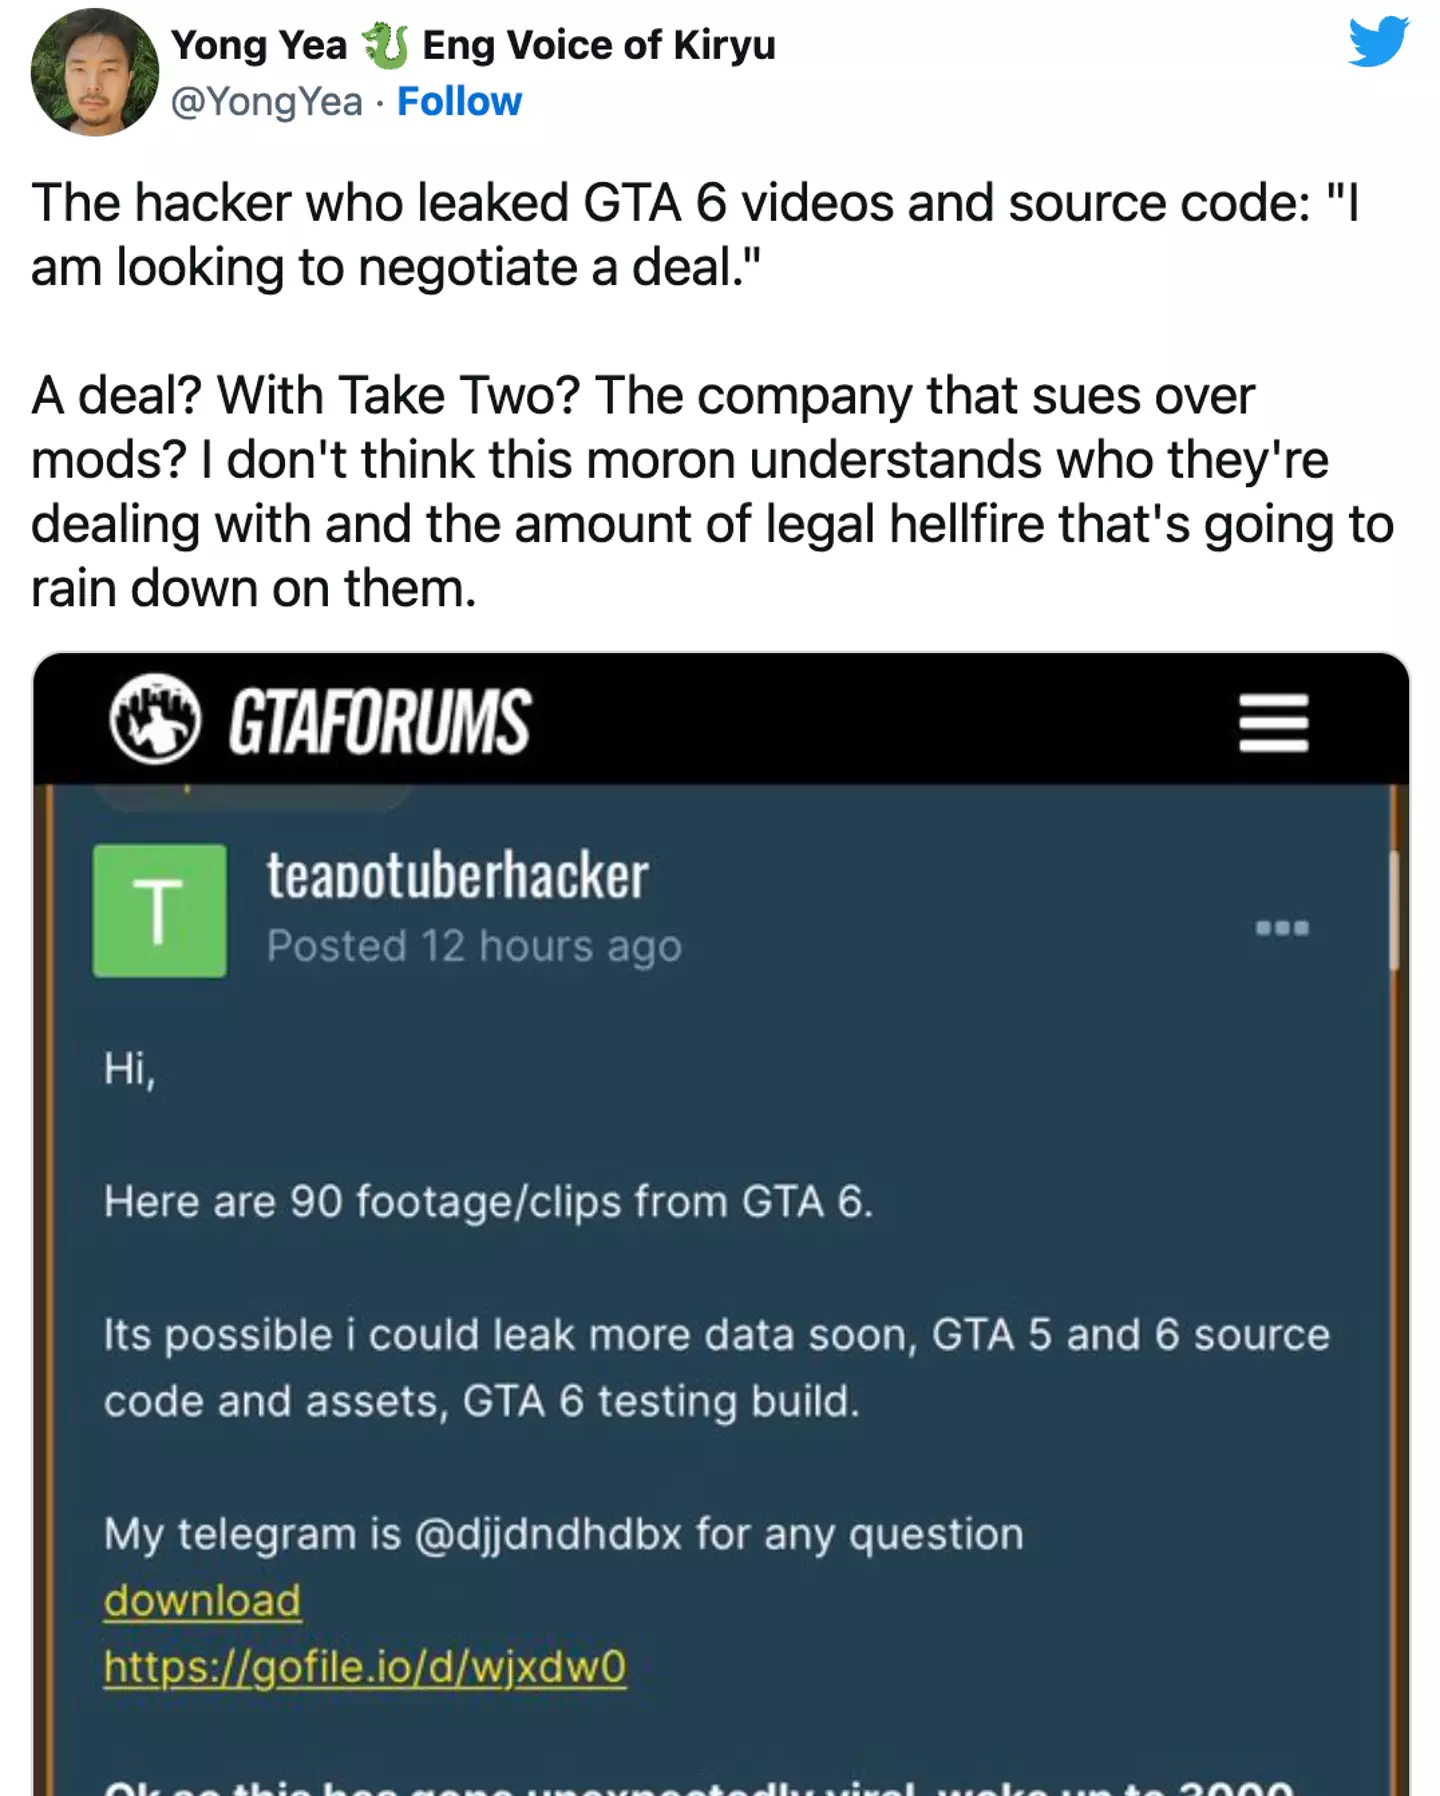 The hacker leaked the footage and clips on a GTA Forum.